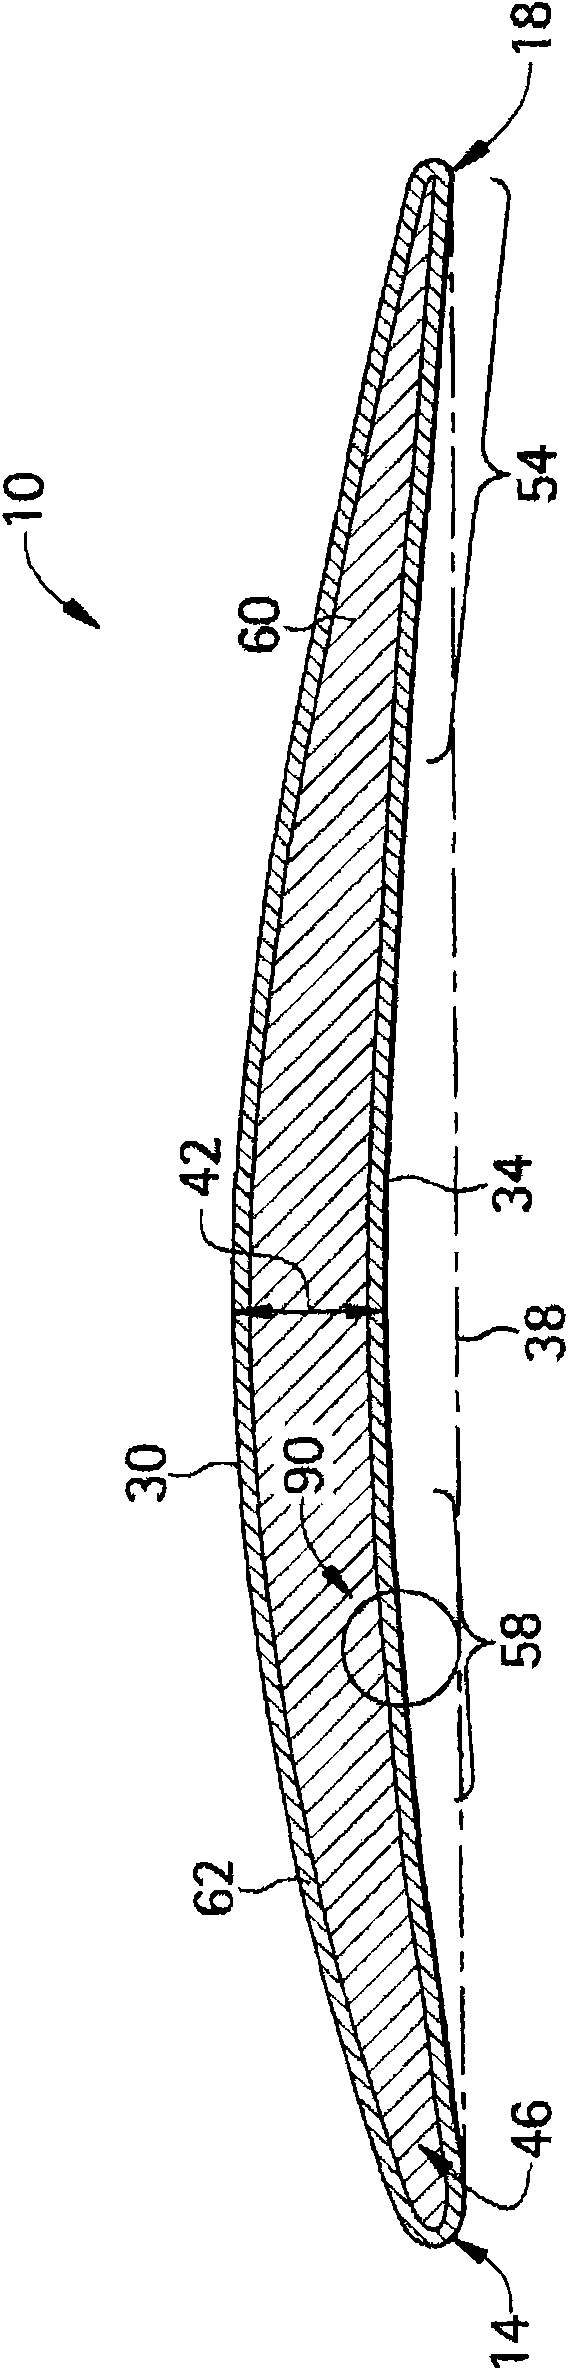 Erosion and corrosion resistant turbine compressor airfoil and method of making the same